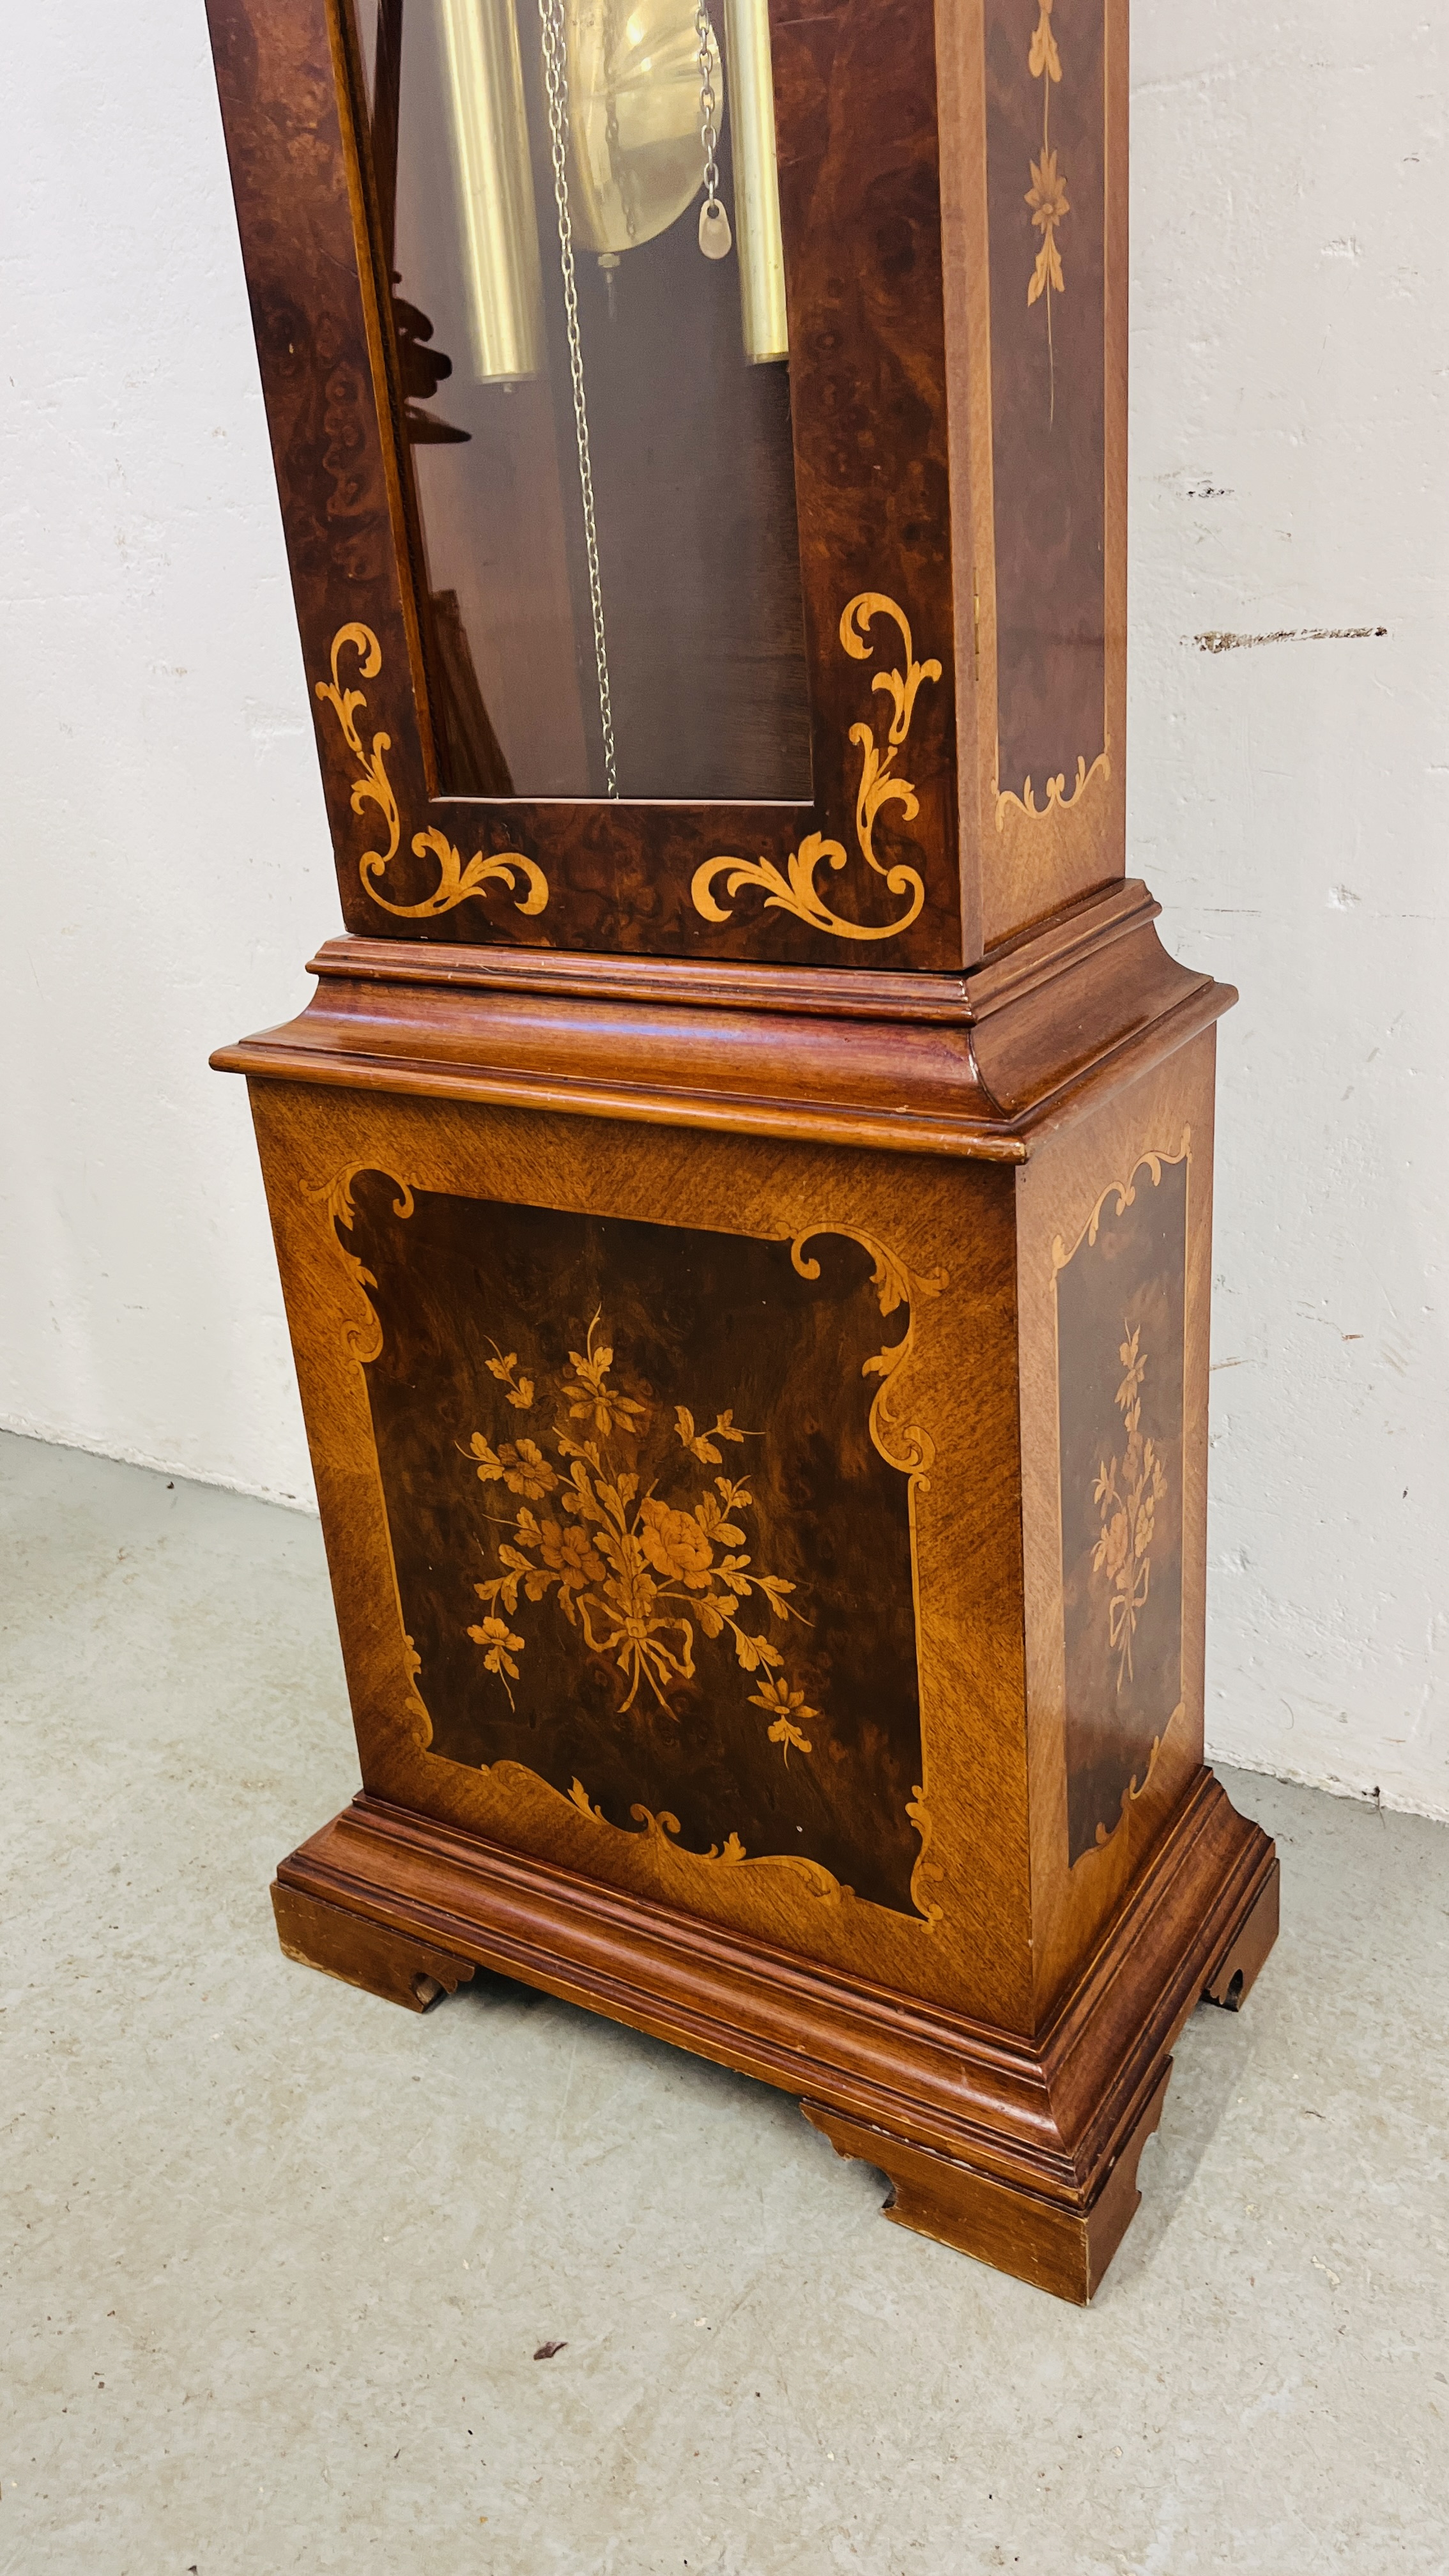 A REPRODUCTION DUTCH STYLE LONG CASE CLOCK WITH MARQUETRY INLAID STYLE DETAILING FACE MARKED TEMPUS - Image 4 of 13